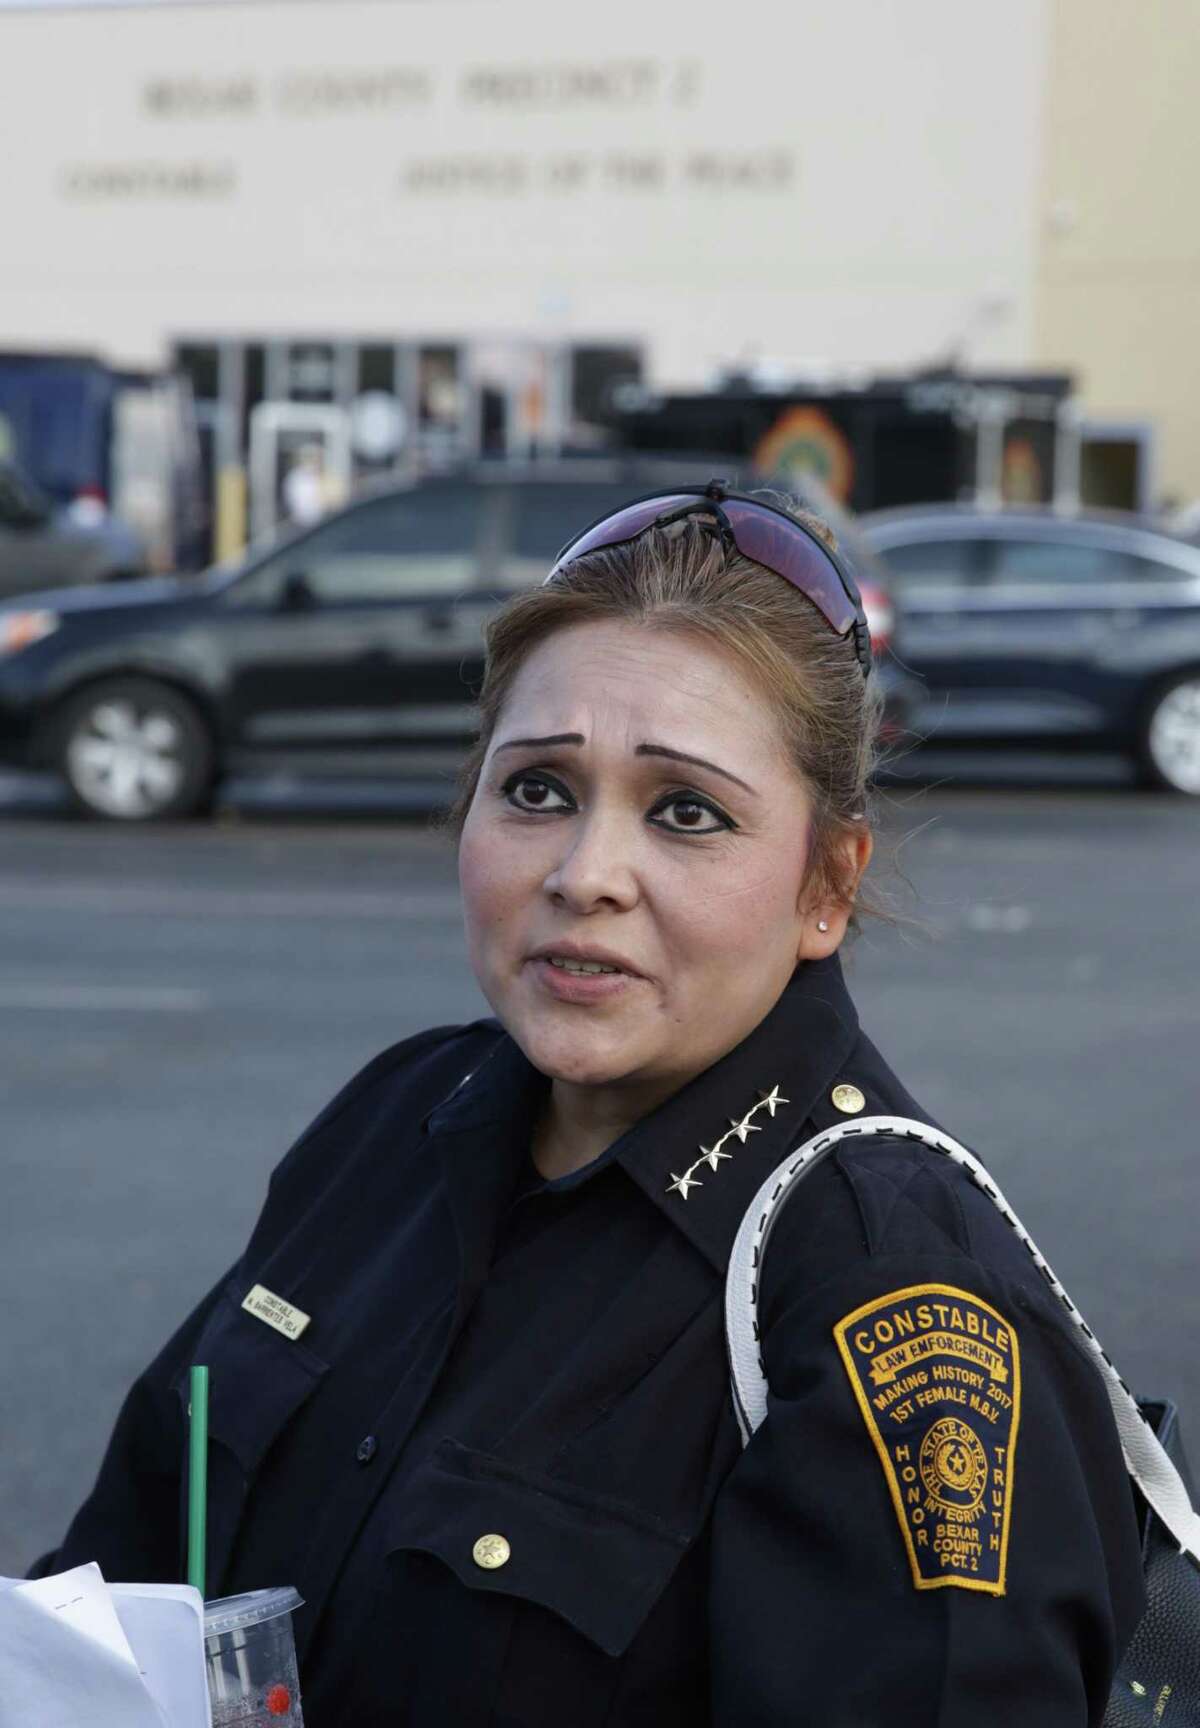 Precinct 2 Constable Michelle Barrientes Vela speaks to members of the media as FBI and Texas Rangers raid her office Monday, Sept. 23.